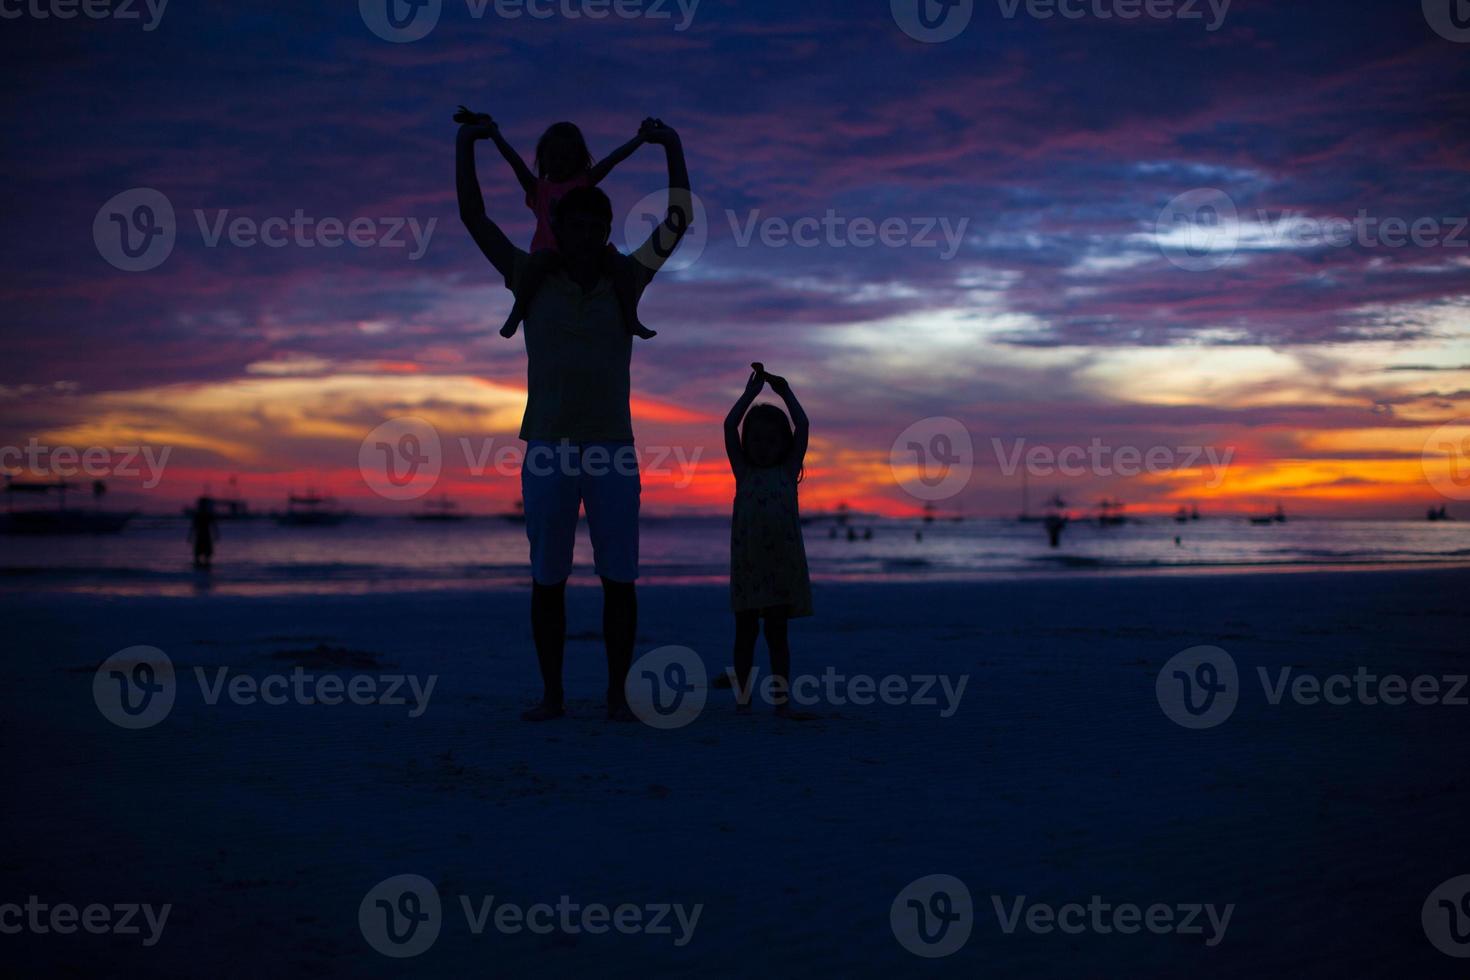 Dad and daughters silhouette in the sunset on the beach on Boracay photo